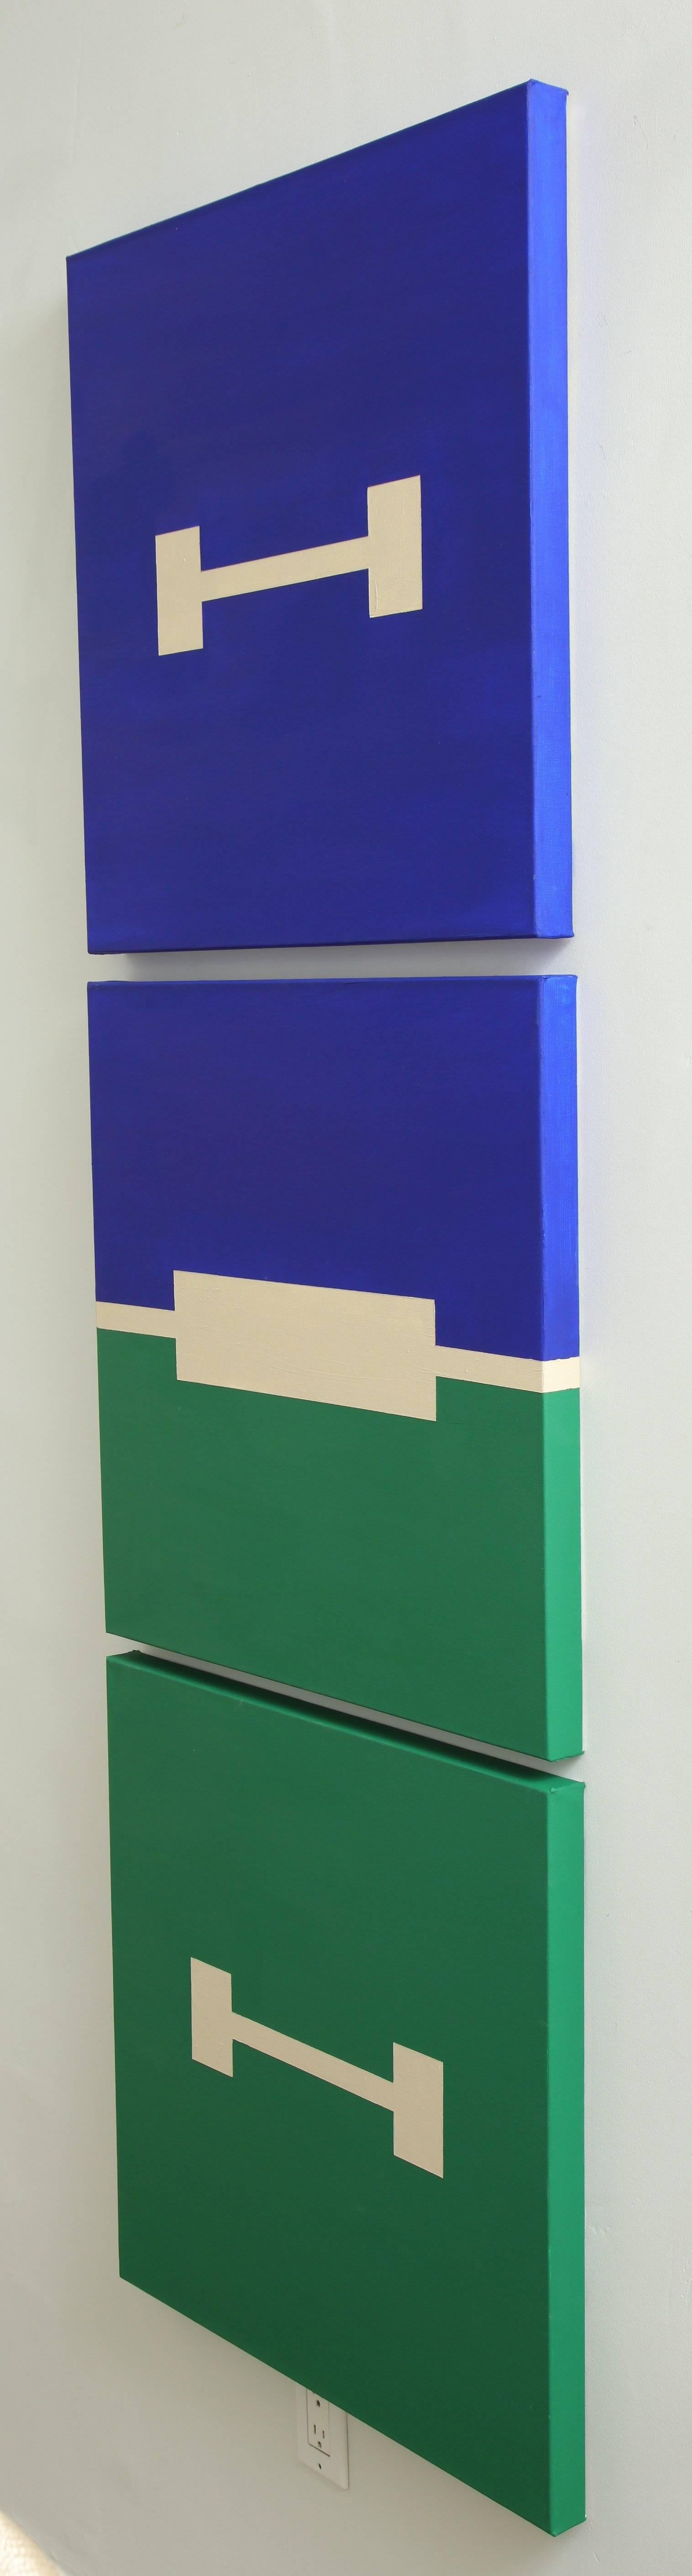 The rich &quot;Cobalt Blue and Green&quot; Triptych Painting  is a study in balance of color and form. Inspired by early European Urban Planning and the motion of orderly movement within a space.
The piece of art is signed by the artist by the